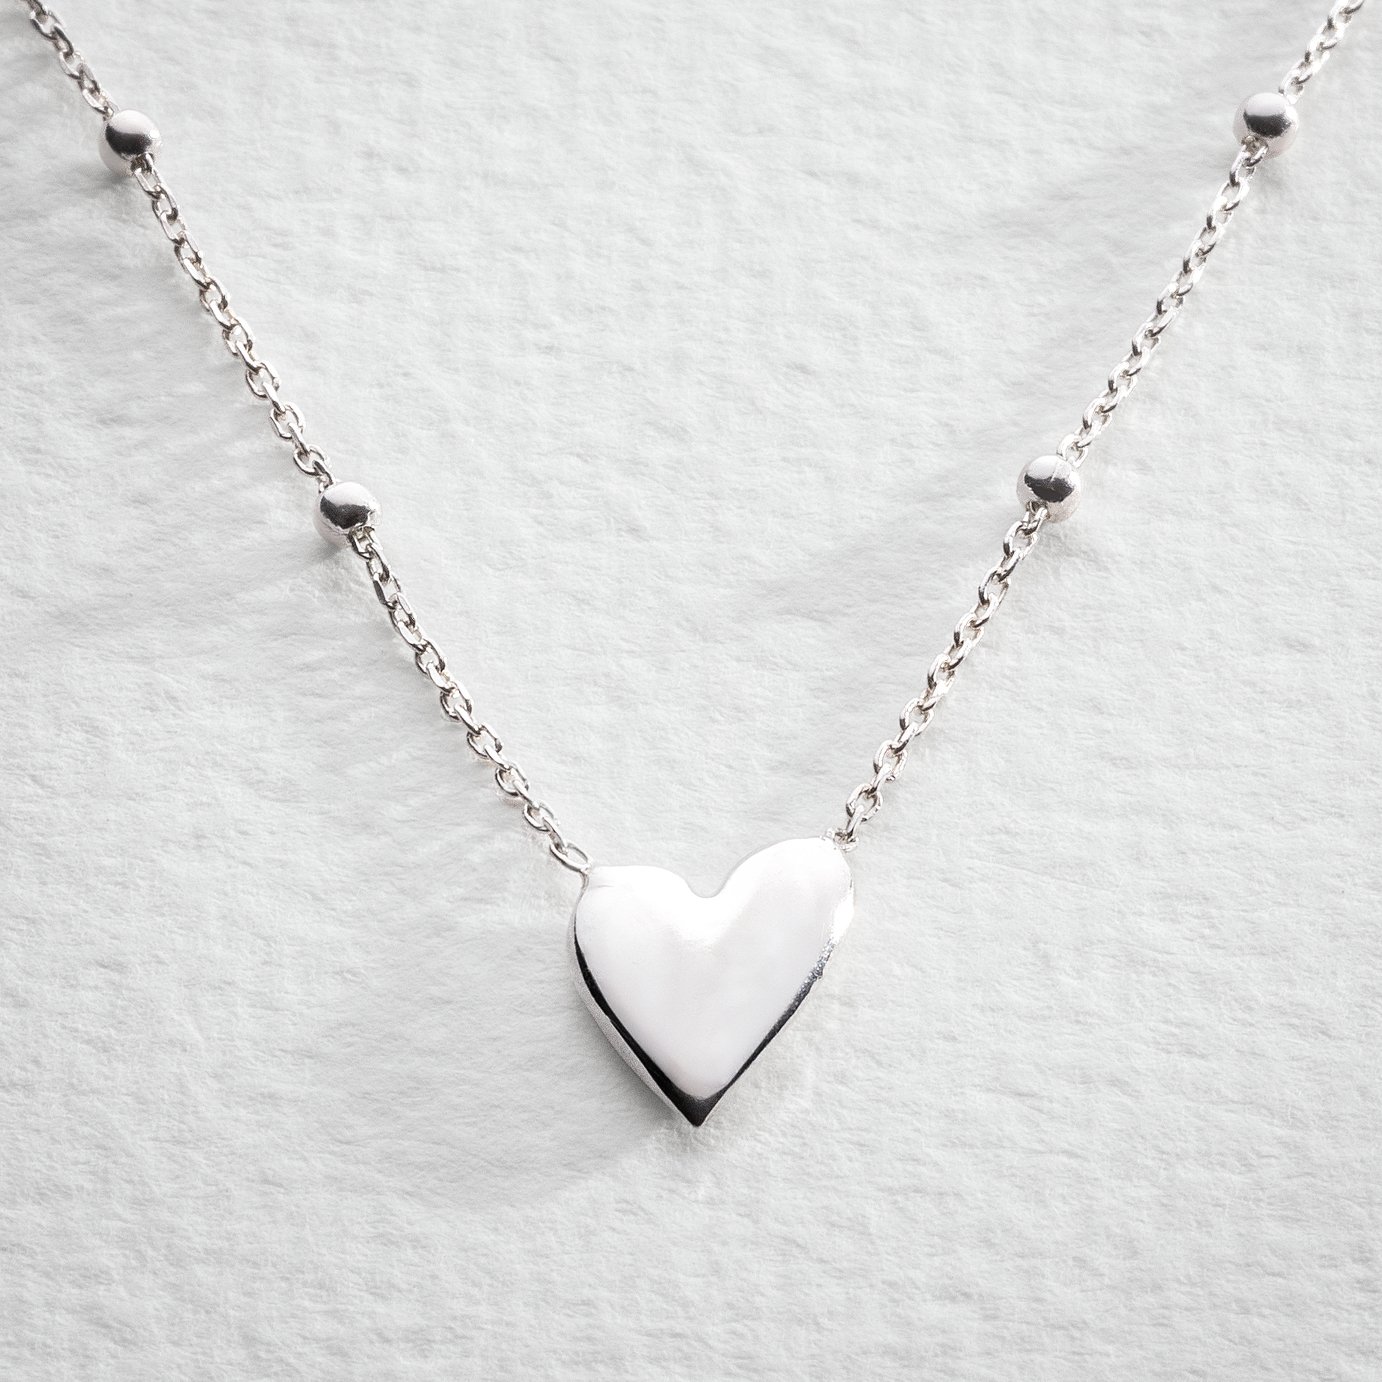 Revere Sterling Silver Heart Necklace